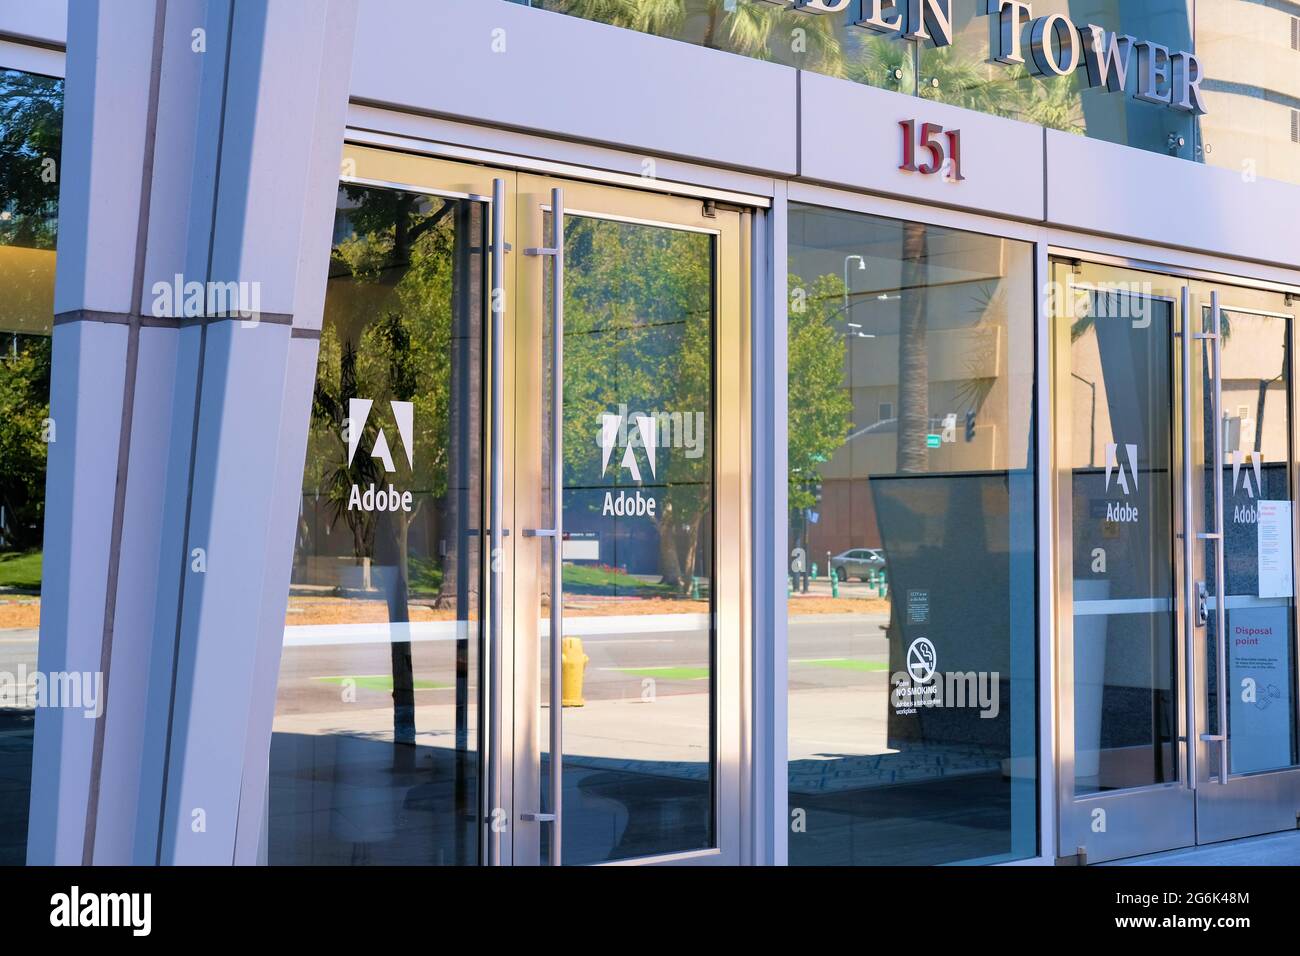 Main entrance to Almaden Tower, home of Adobe headquarters in San Jose, California; Silicon Valley computer software technology company. Stock Photo